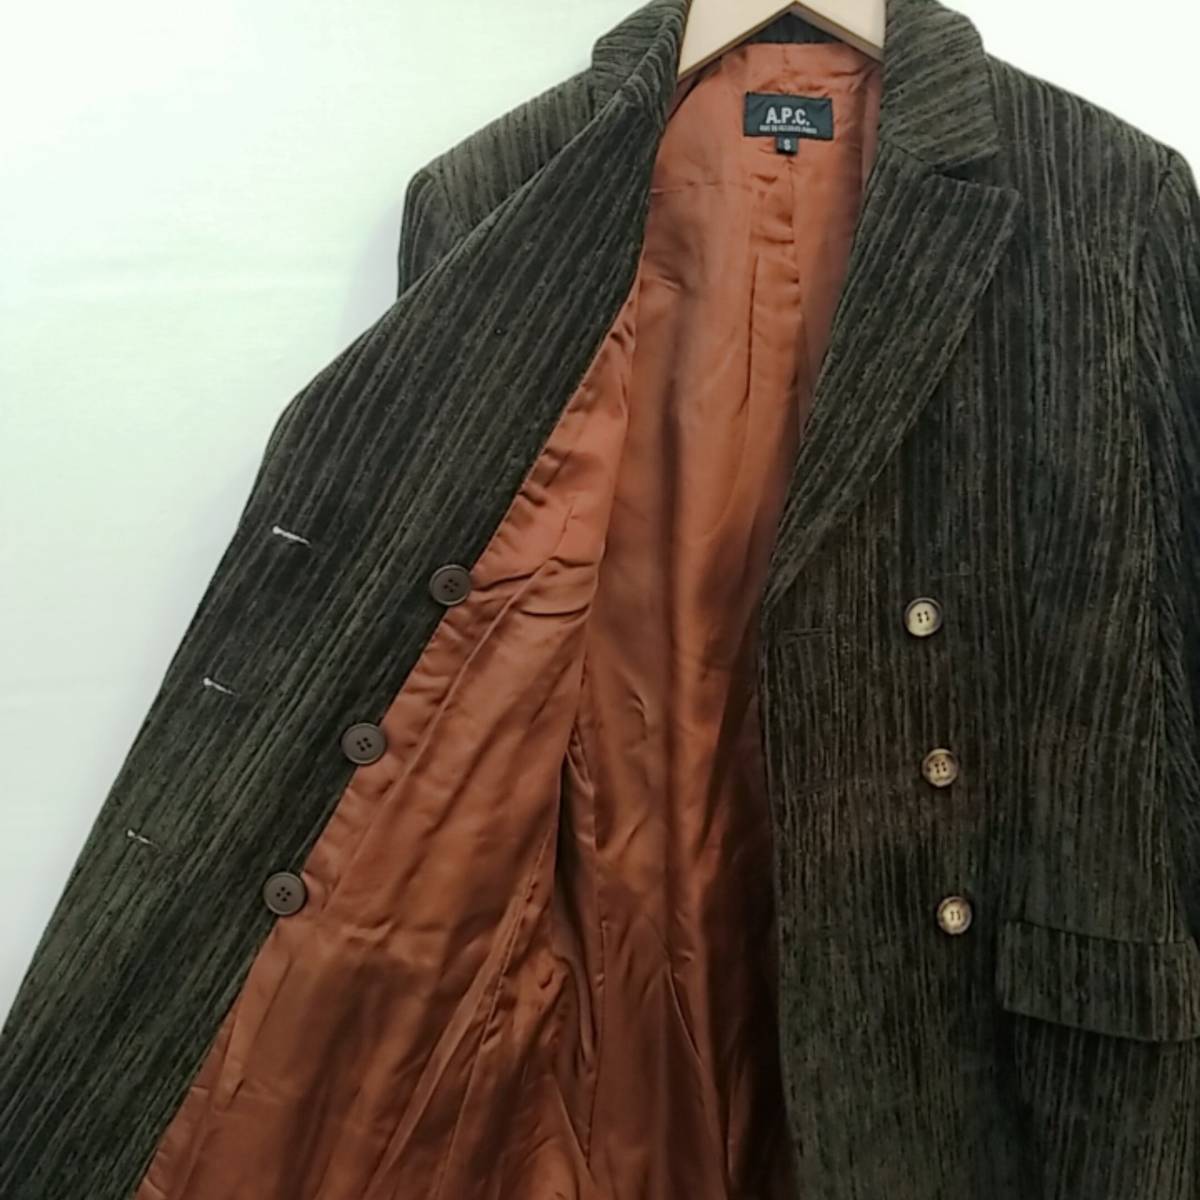  Old A.P.C. A.P.C. corduroy double jacket futoshi . size S Brown France made 02E2503 APCmel